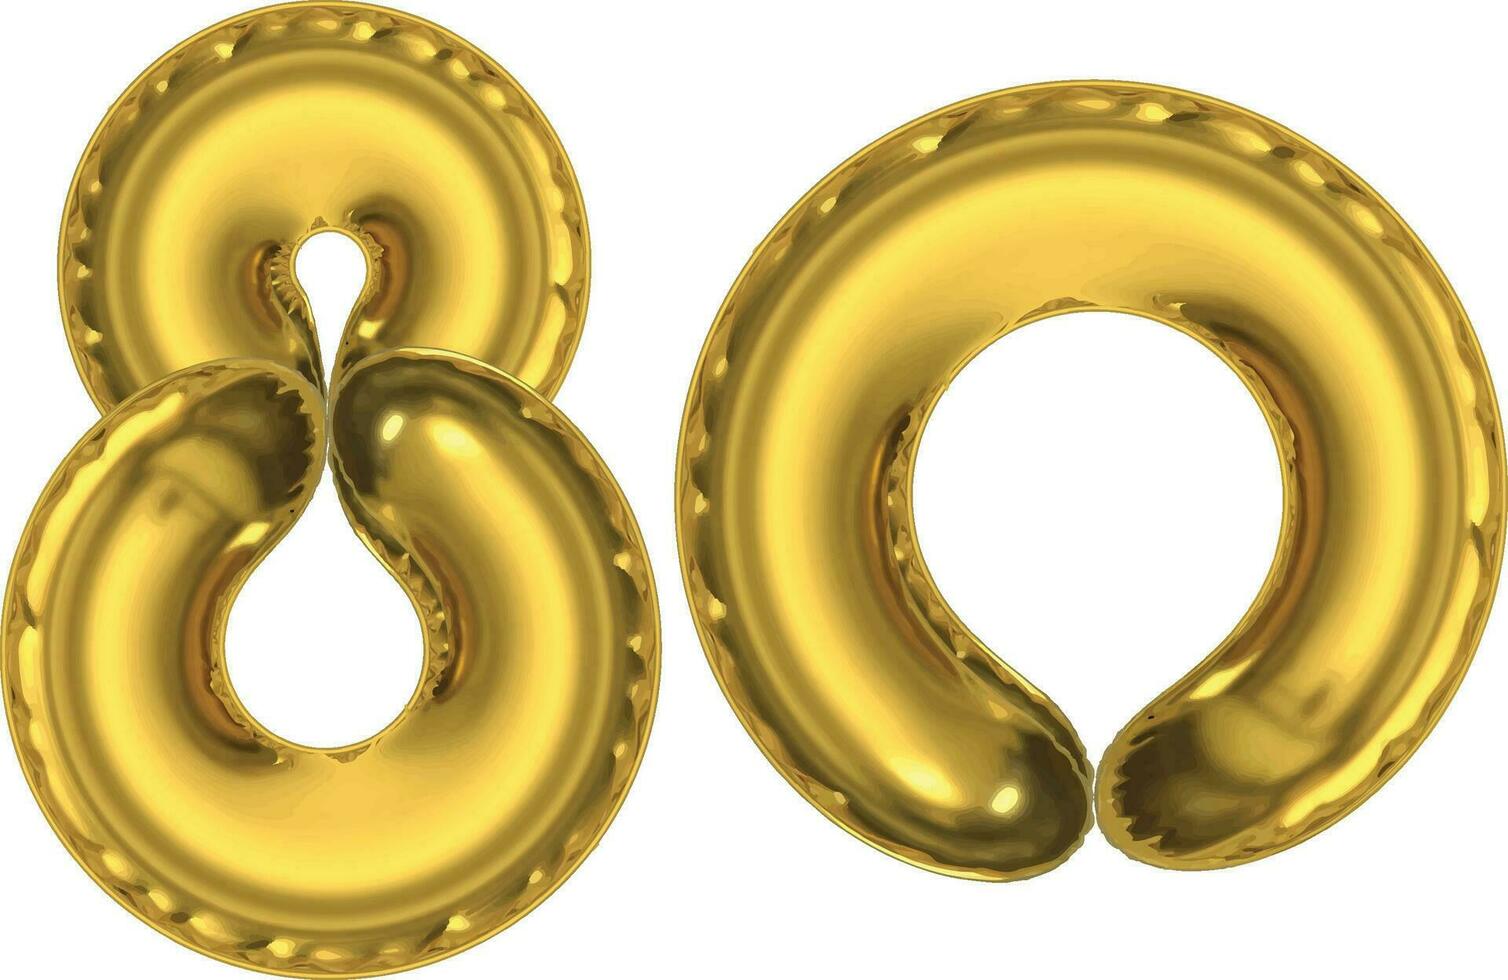 80. gold 3d numbers. Poster template for Celebrating 80th anniversary event party. Vector illustration